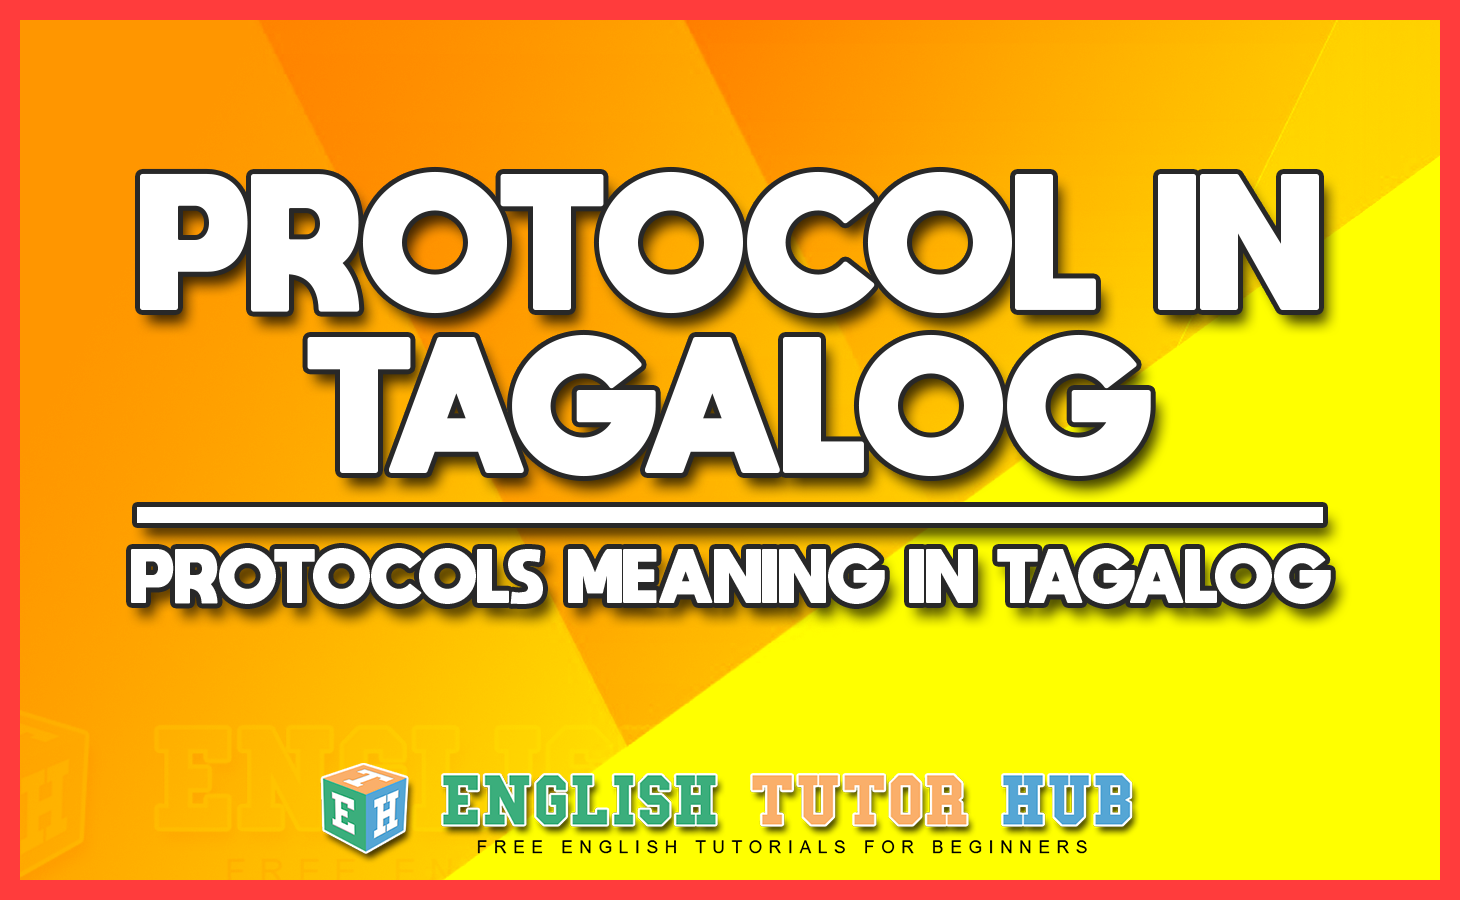 Protocol in Tagalog - Protocol Meaning in Tagalog